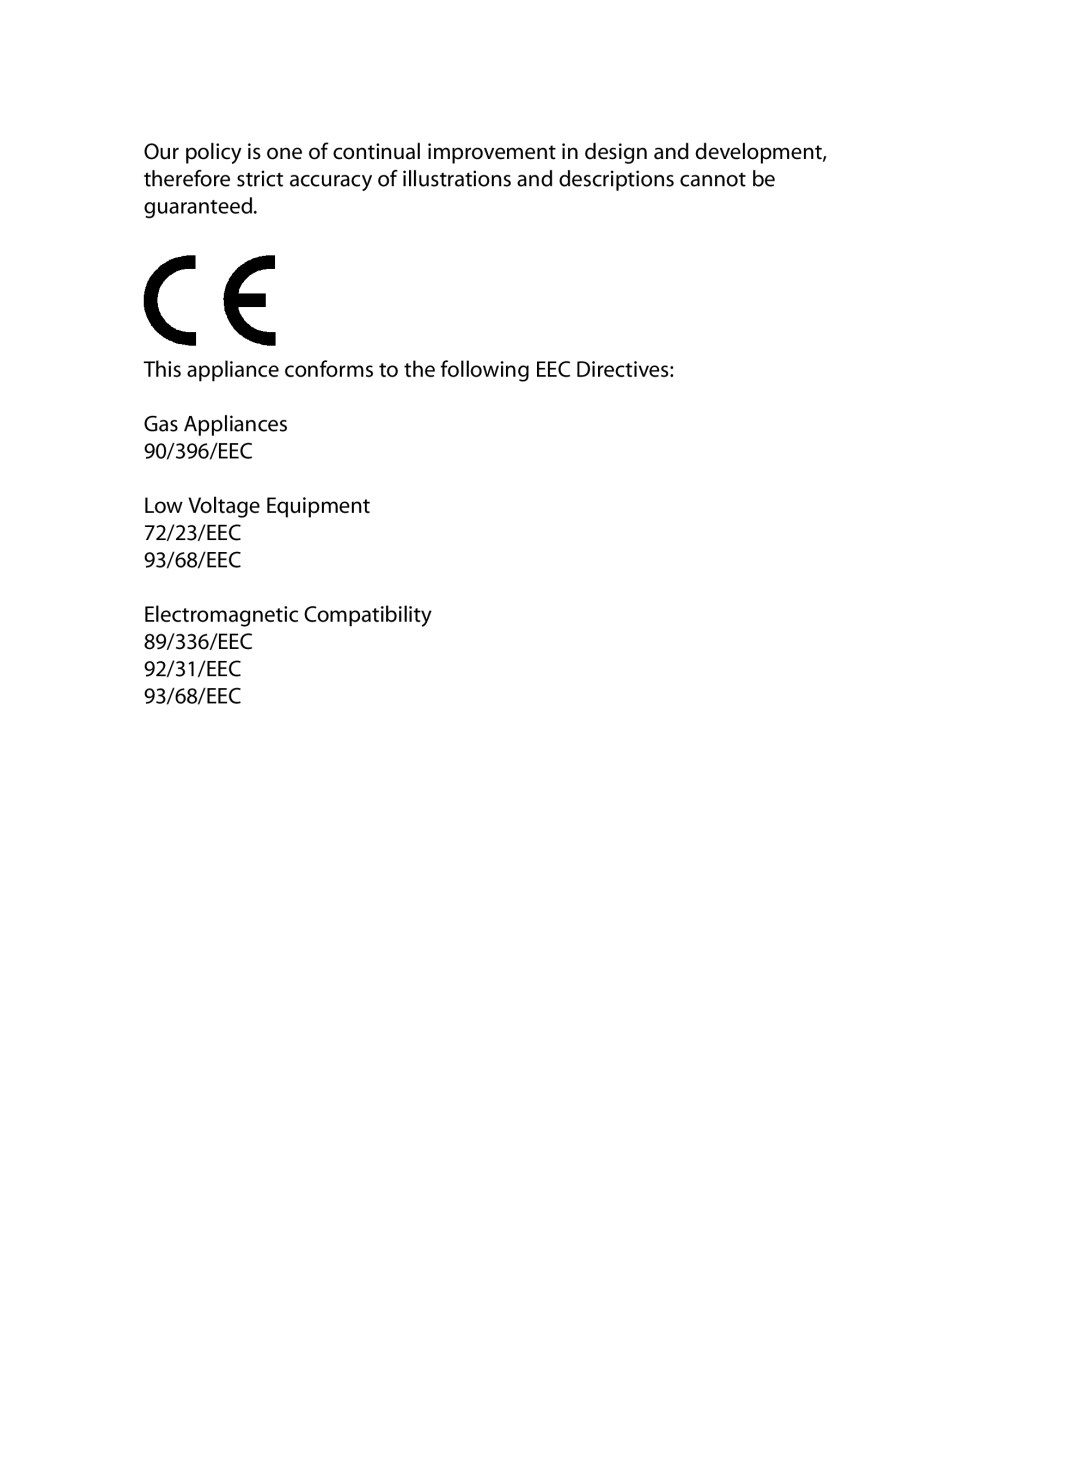 Cannon 10297G Mk2 manual This appliance conforms to the following EEC Directives, Low Voltage Equipment 72/23/EEC 93/68/EEC 